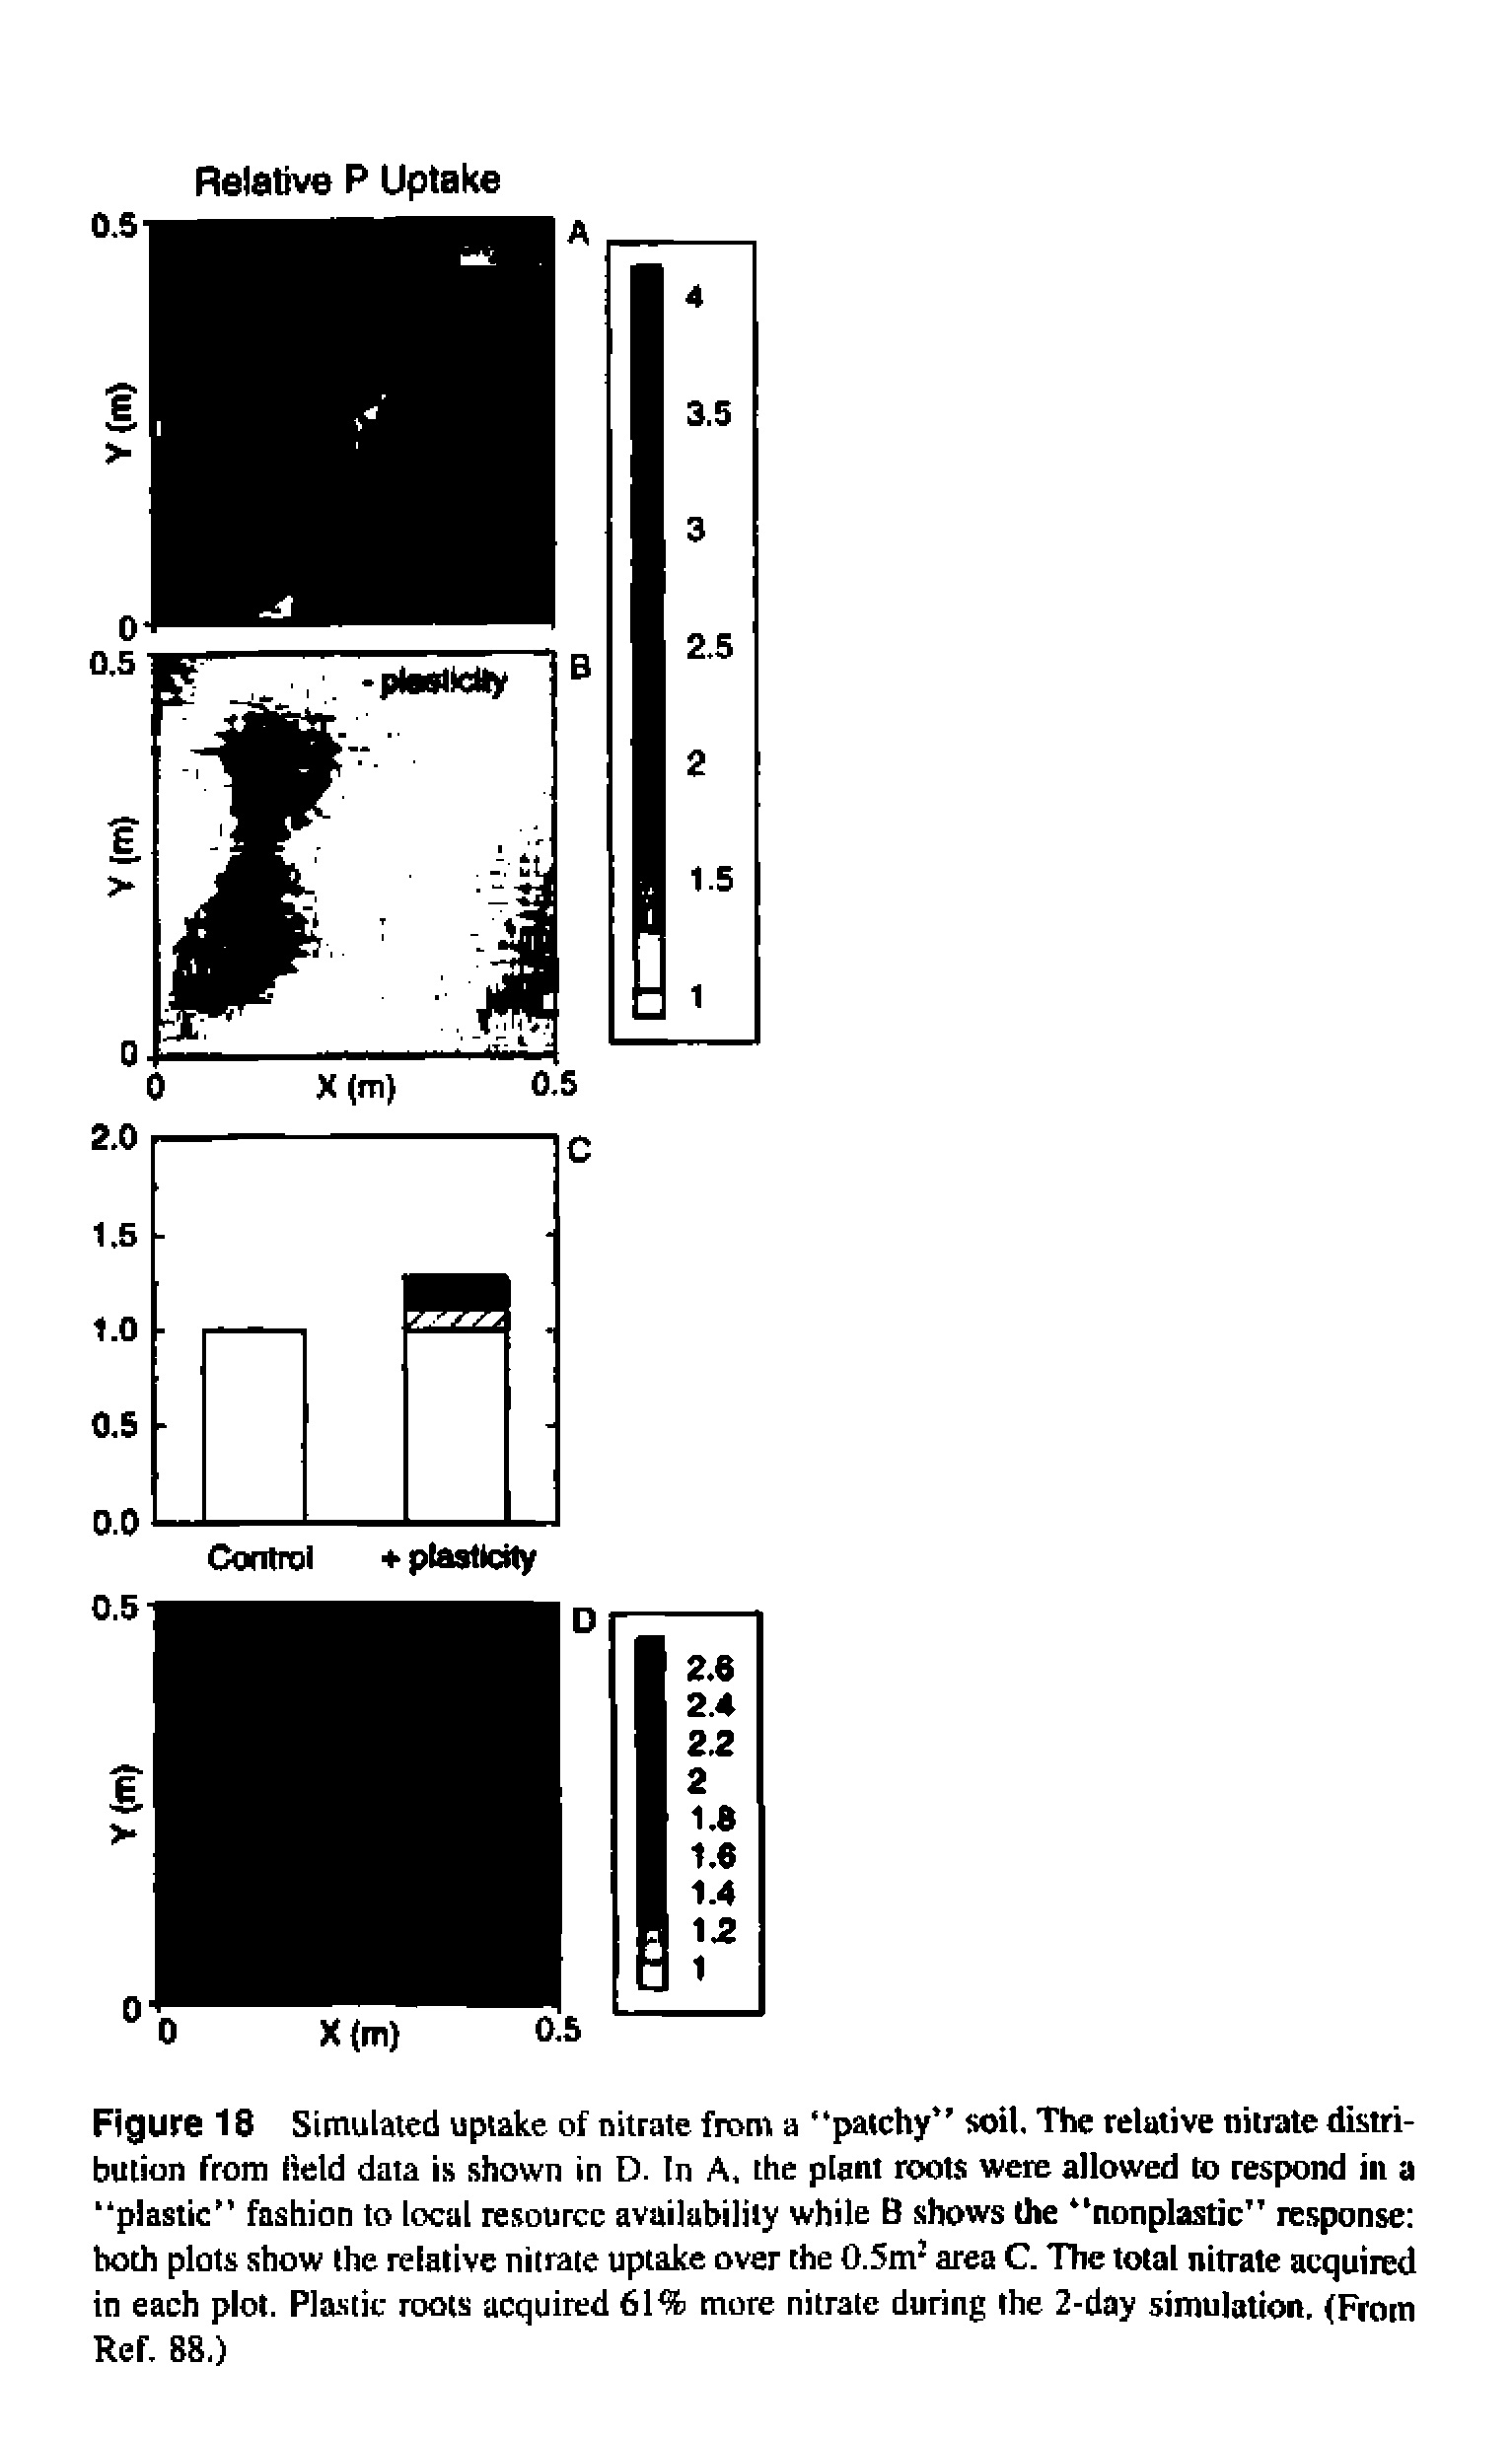 Figure 18 Simulated uptake of nitrate from a "patchy soil. The relative nitrate distribution from held data is shown in D. In A, the plant roots were allowed to respond in a plastic fashion to local resource availability while B shows the nonplastic response both plots show the relative nitrate uptake over the 0.5m area C. The total nitrate acquired in each plot. Pla-stic roots acquired 61% more nitrate during the 2-day simulation, (From Ref. 88.)...